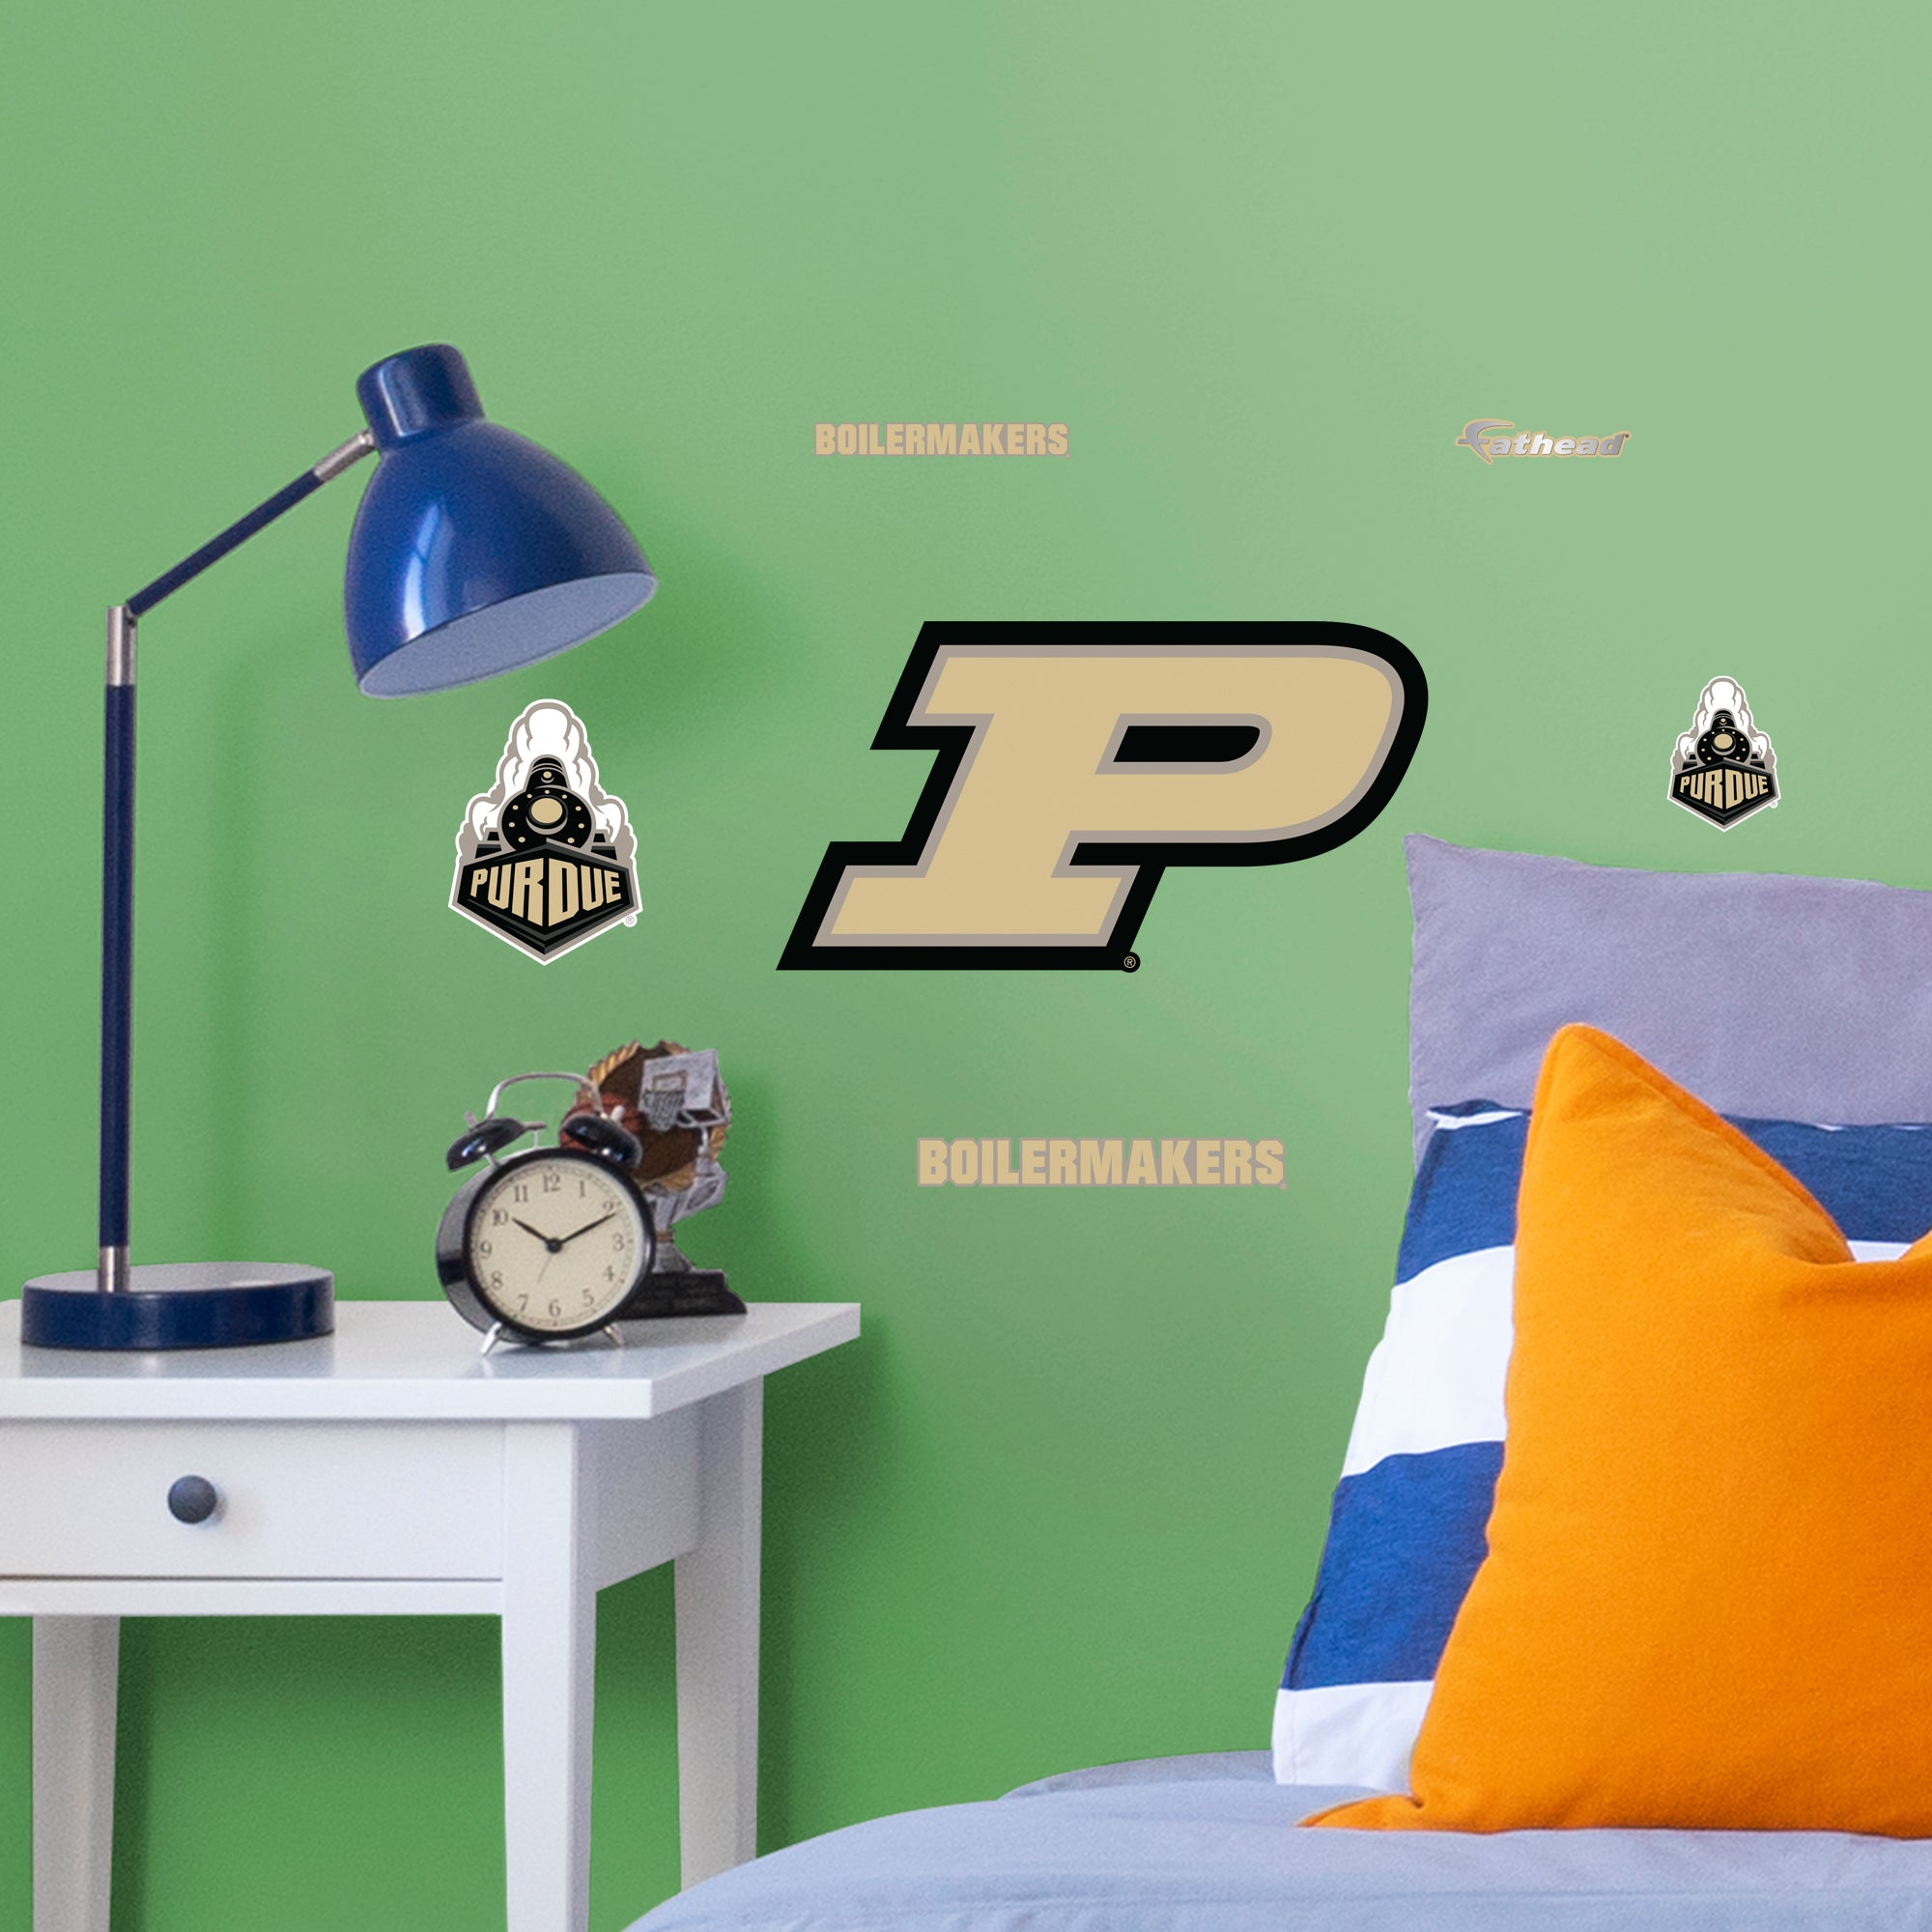 Purdue Boilermakers 2020 P POD Teammate Logo - Officially Licensed NCAA Removable Wall Decal Large by Fathead | Vinyl